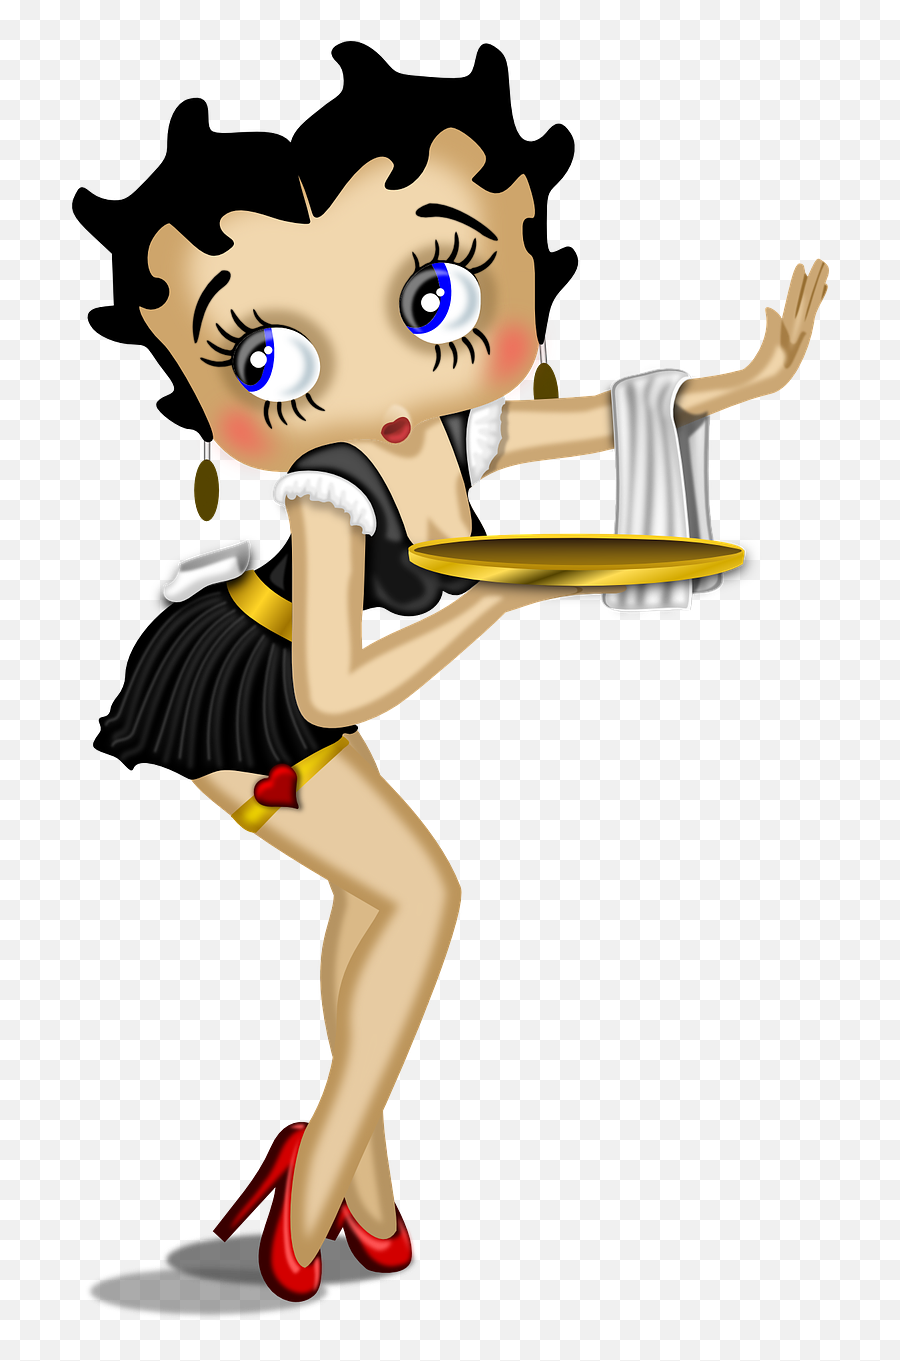 Waitress Sexy Cartoon - Free Vector Graphic On Pixabay Betty Boop Pie Png,Waitress Png